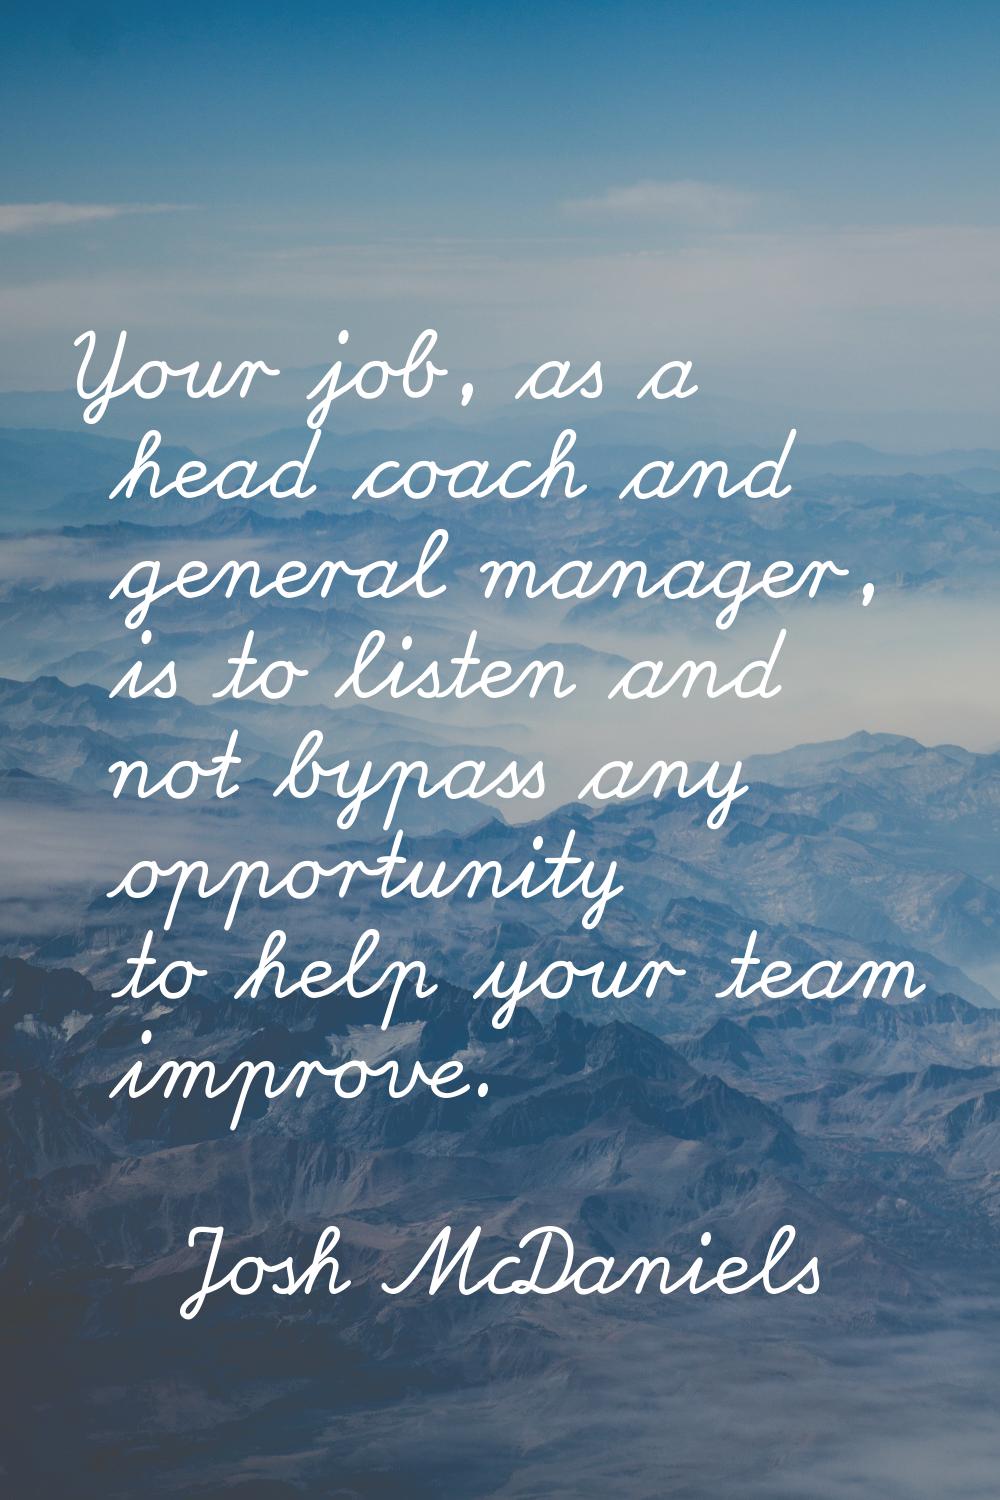 Your job, as a head coach and general manager, is to listen and not bypass any opportunity to help 